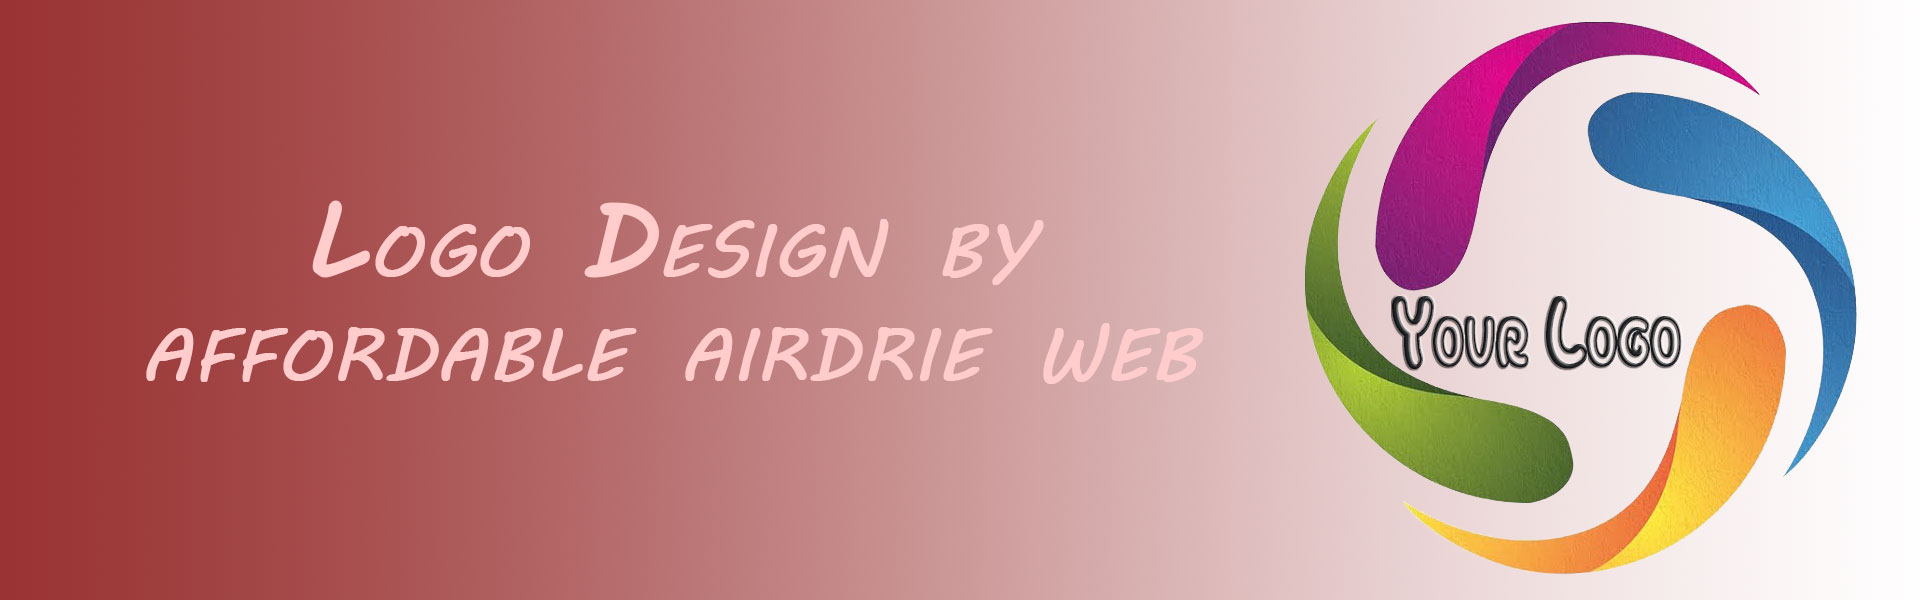 Affordable Airdrie Web is a division of Affordable Web Design Ltd.